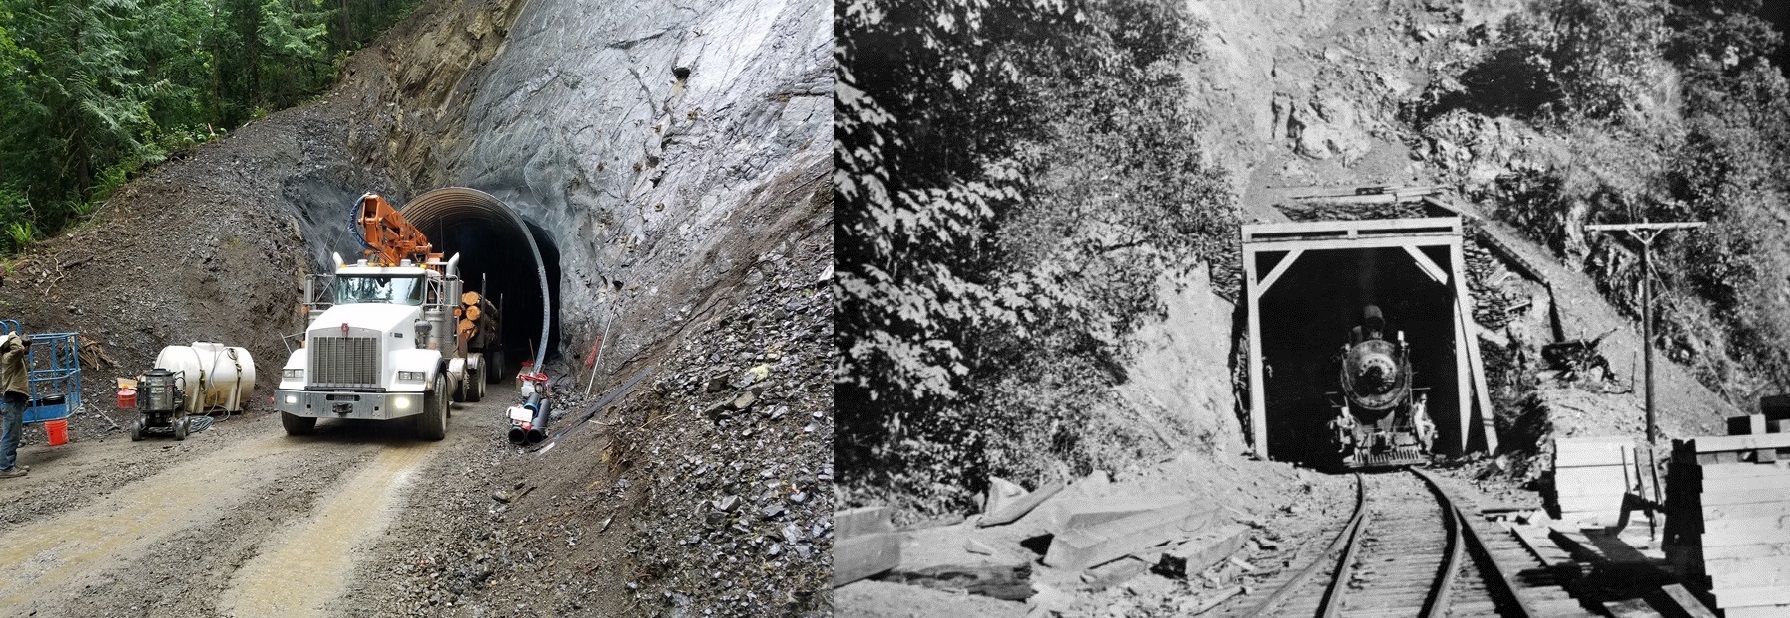 Side-by-side comparison of truck hauling last load of logs through the McFee Tunnel and historic photo of locomotive exiting McFee Tunnel